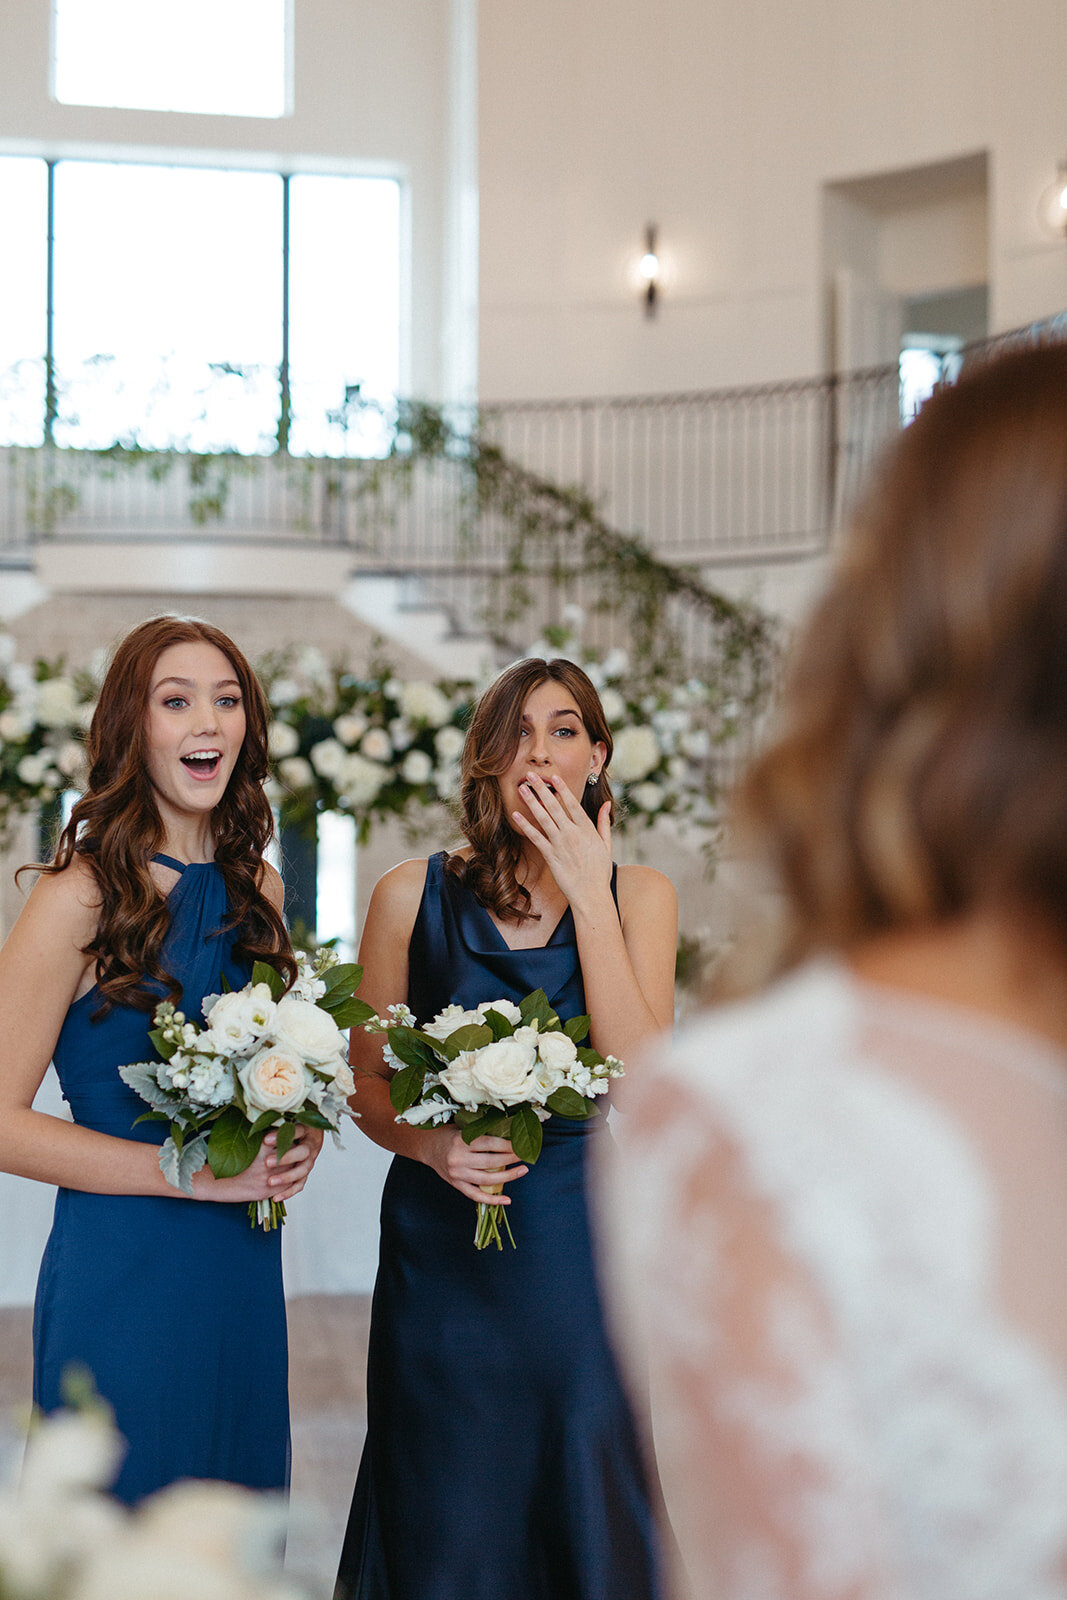 Two bridesmaids in blue satin gowns holding white bouquets gasp at bride in a banquet room filled with white florals.